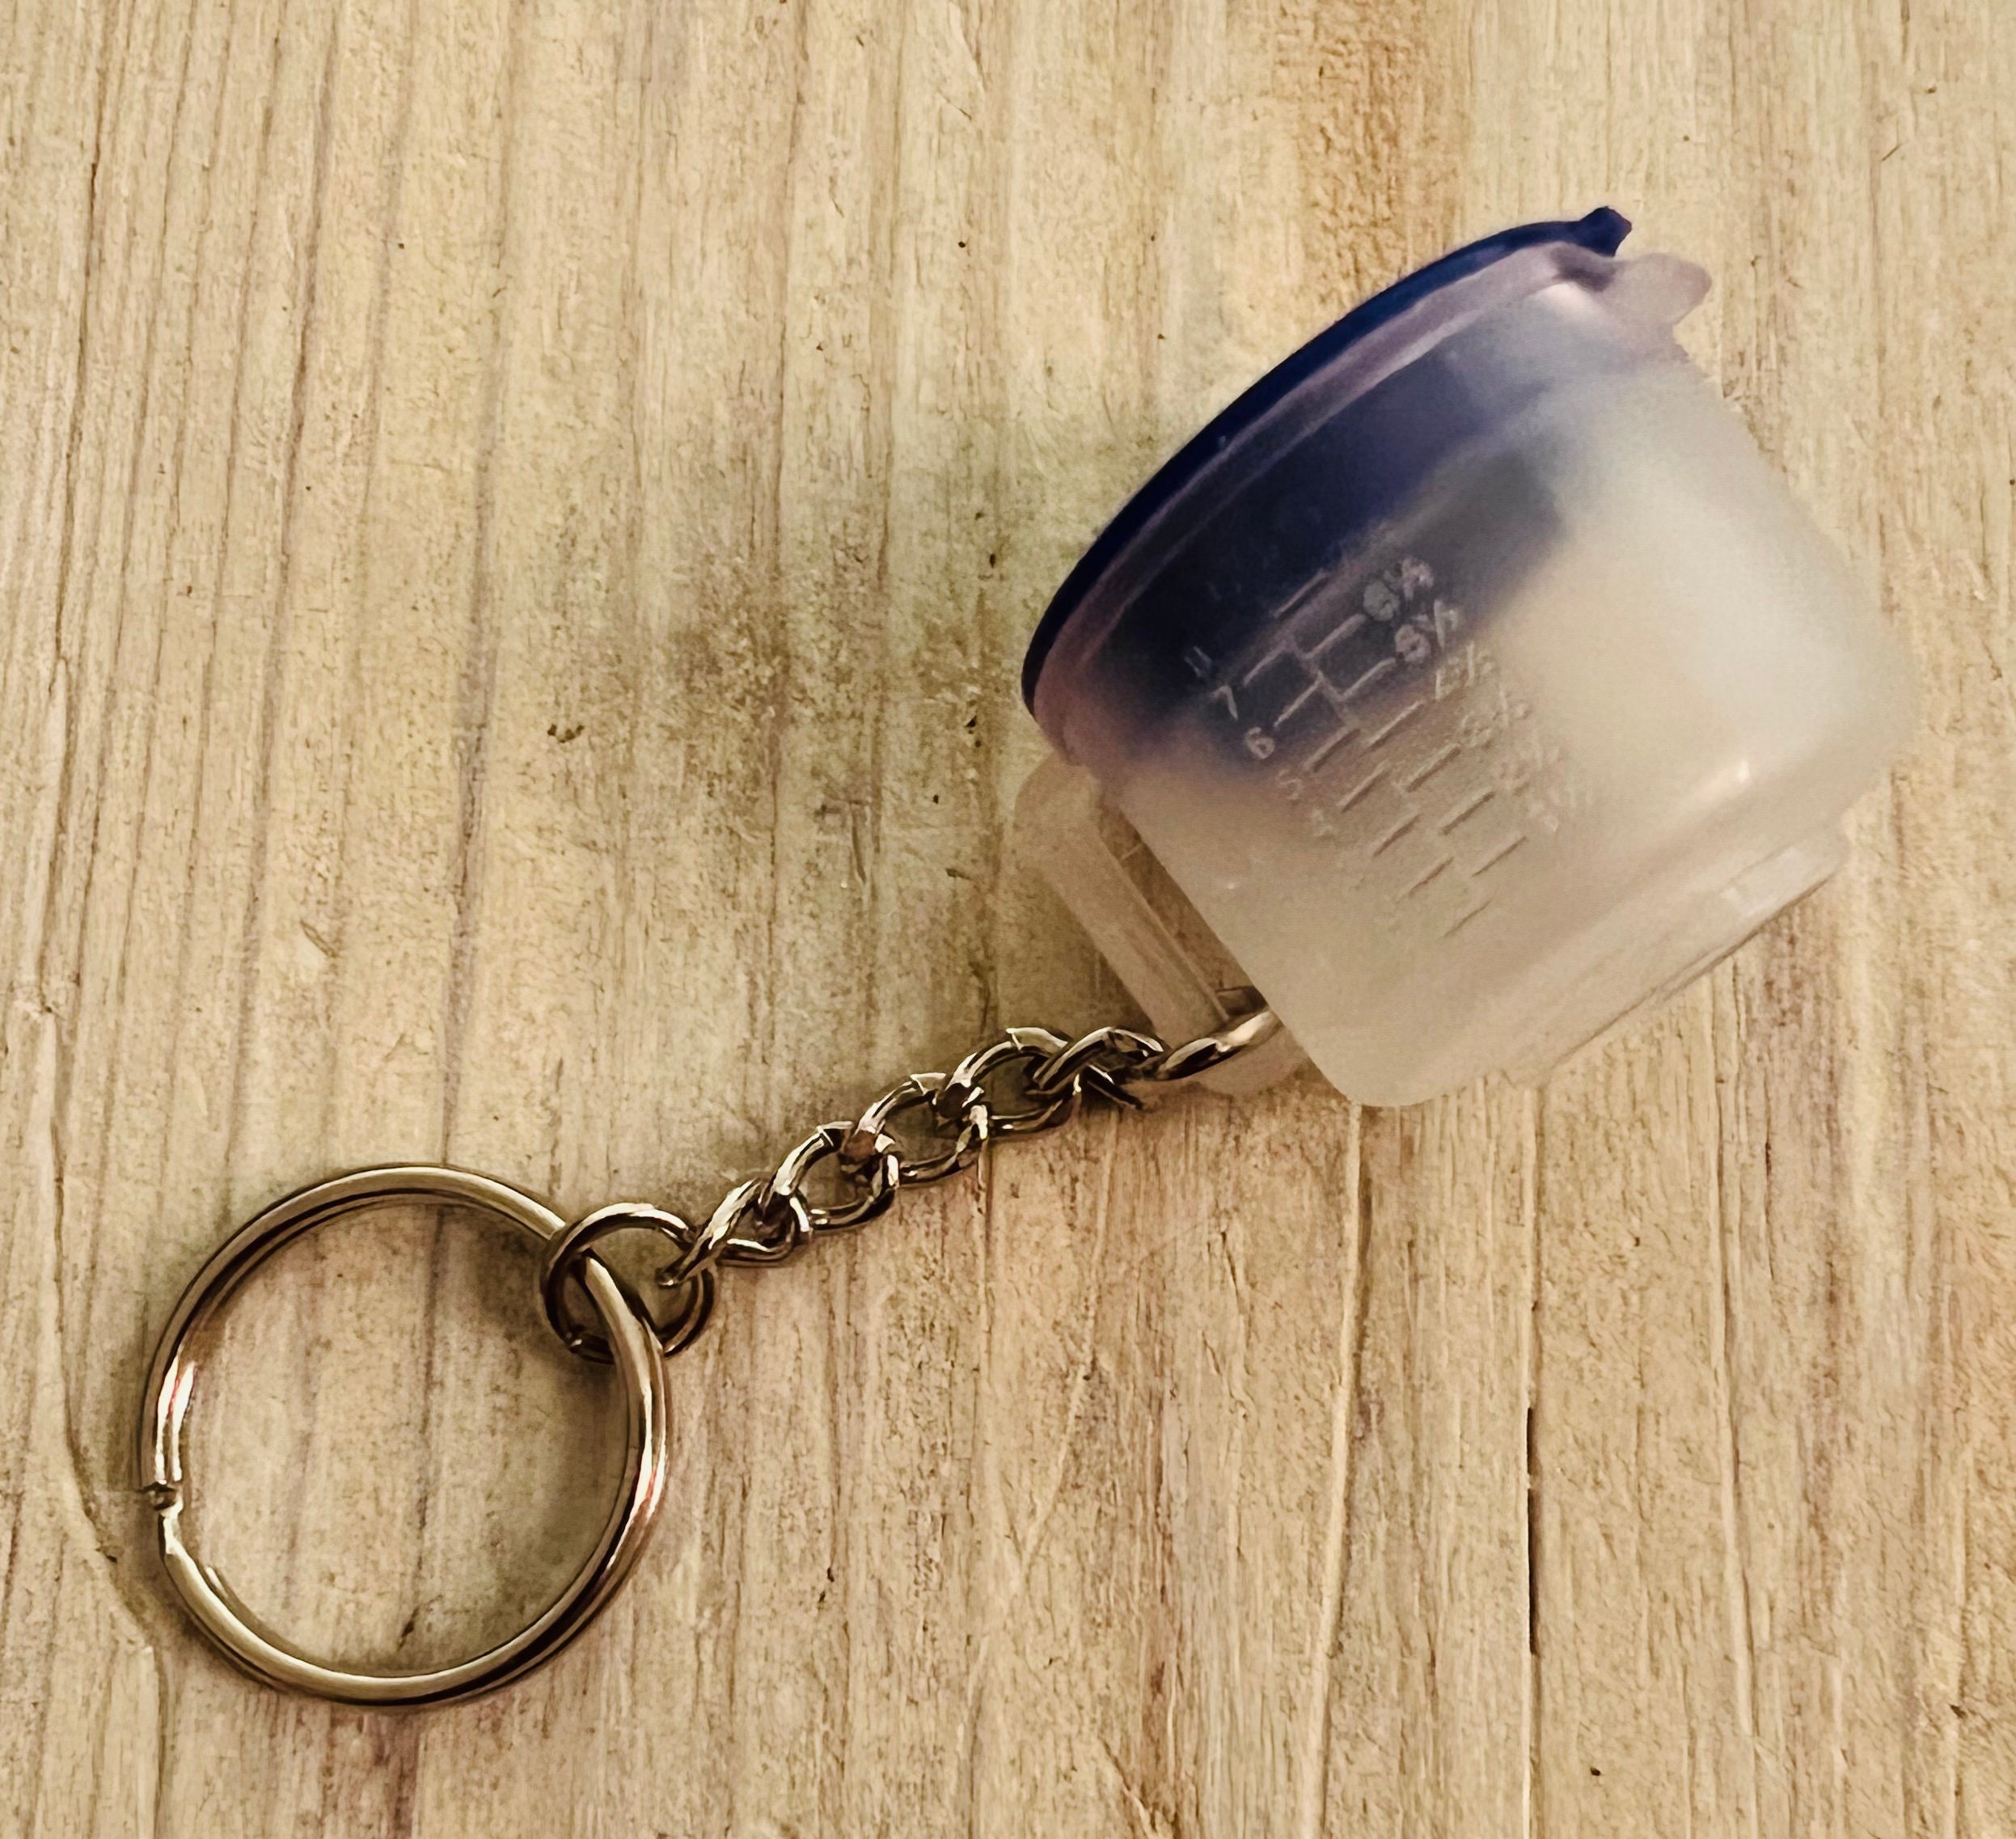 Tupperware Novelty Size Collectible Keychain Blue Measuring Cup